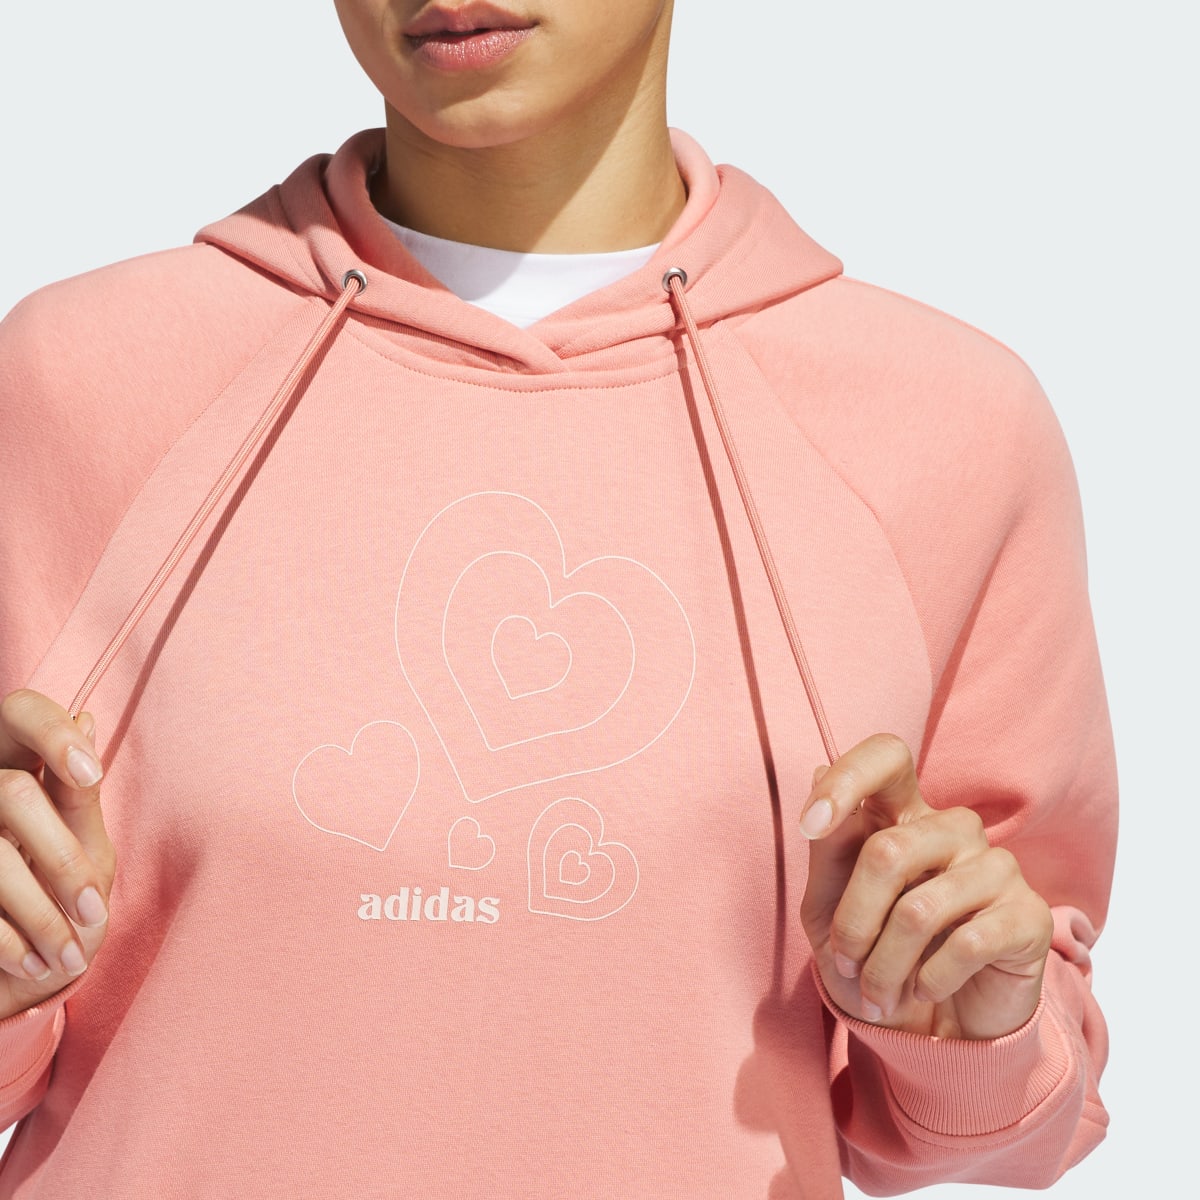 Adidas ALL SZN Valentine's Day Pullover Hoodie. 6